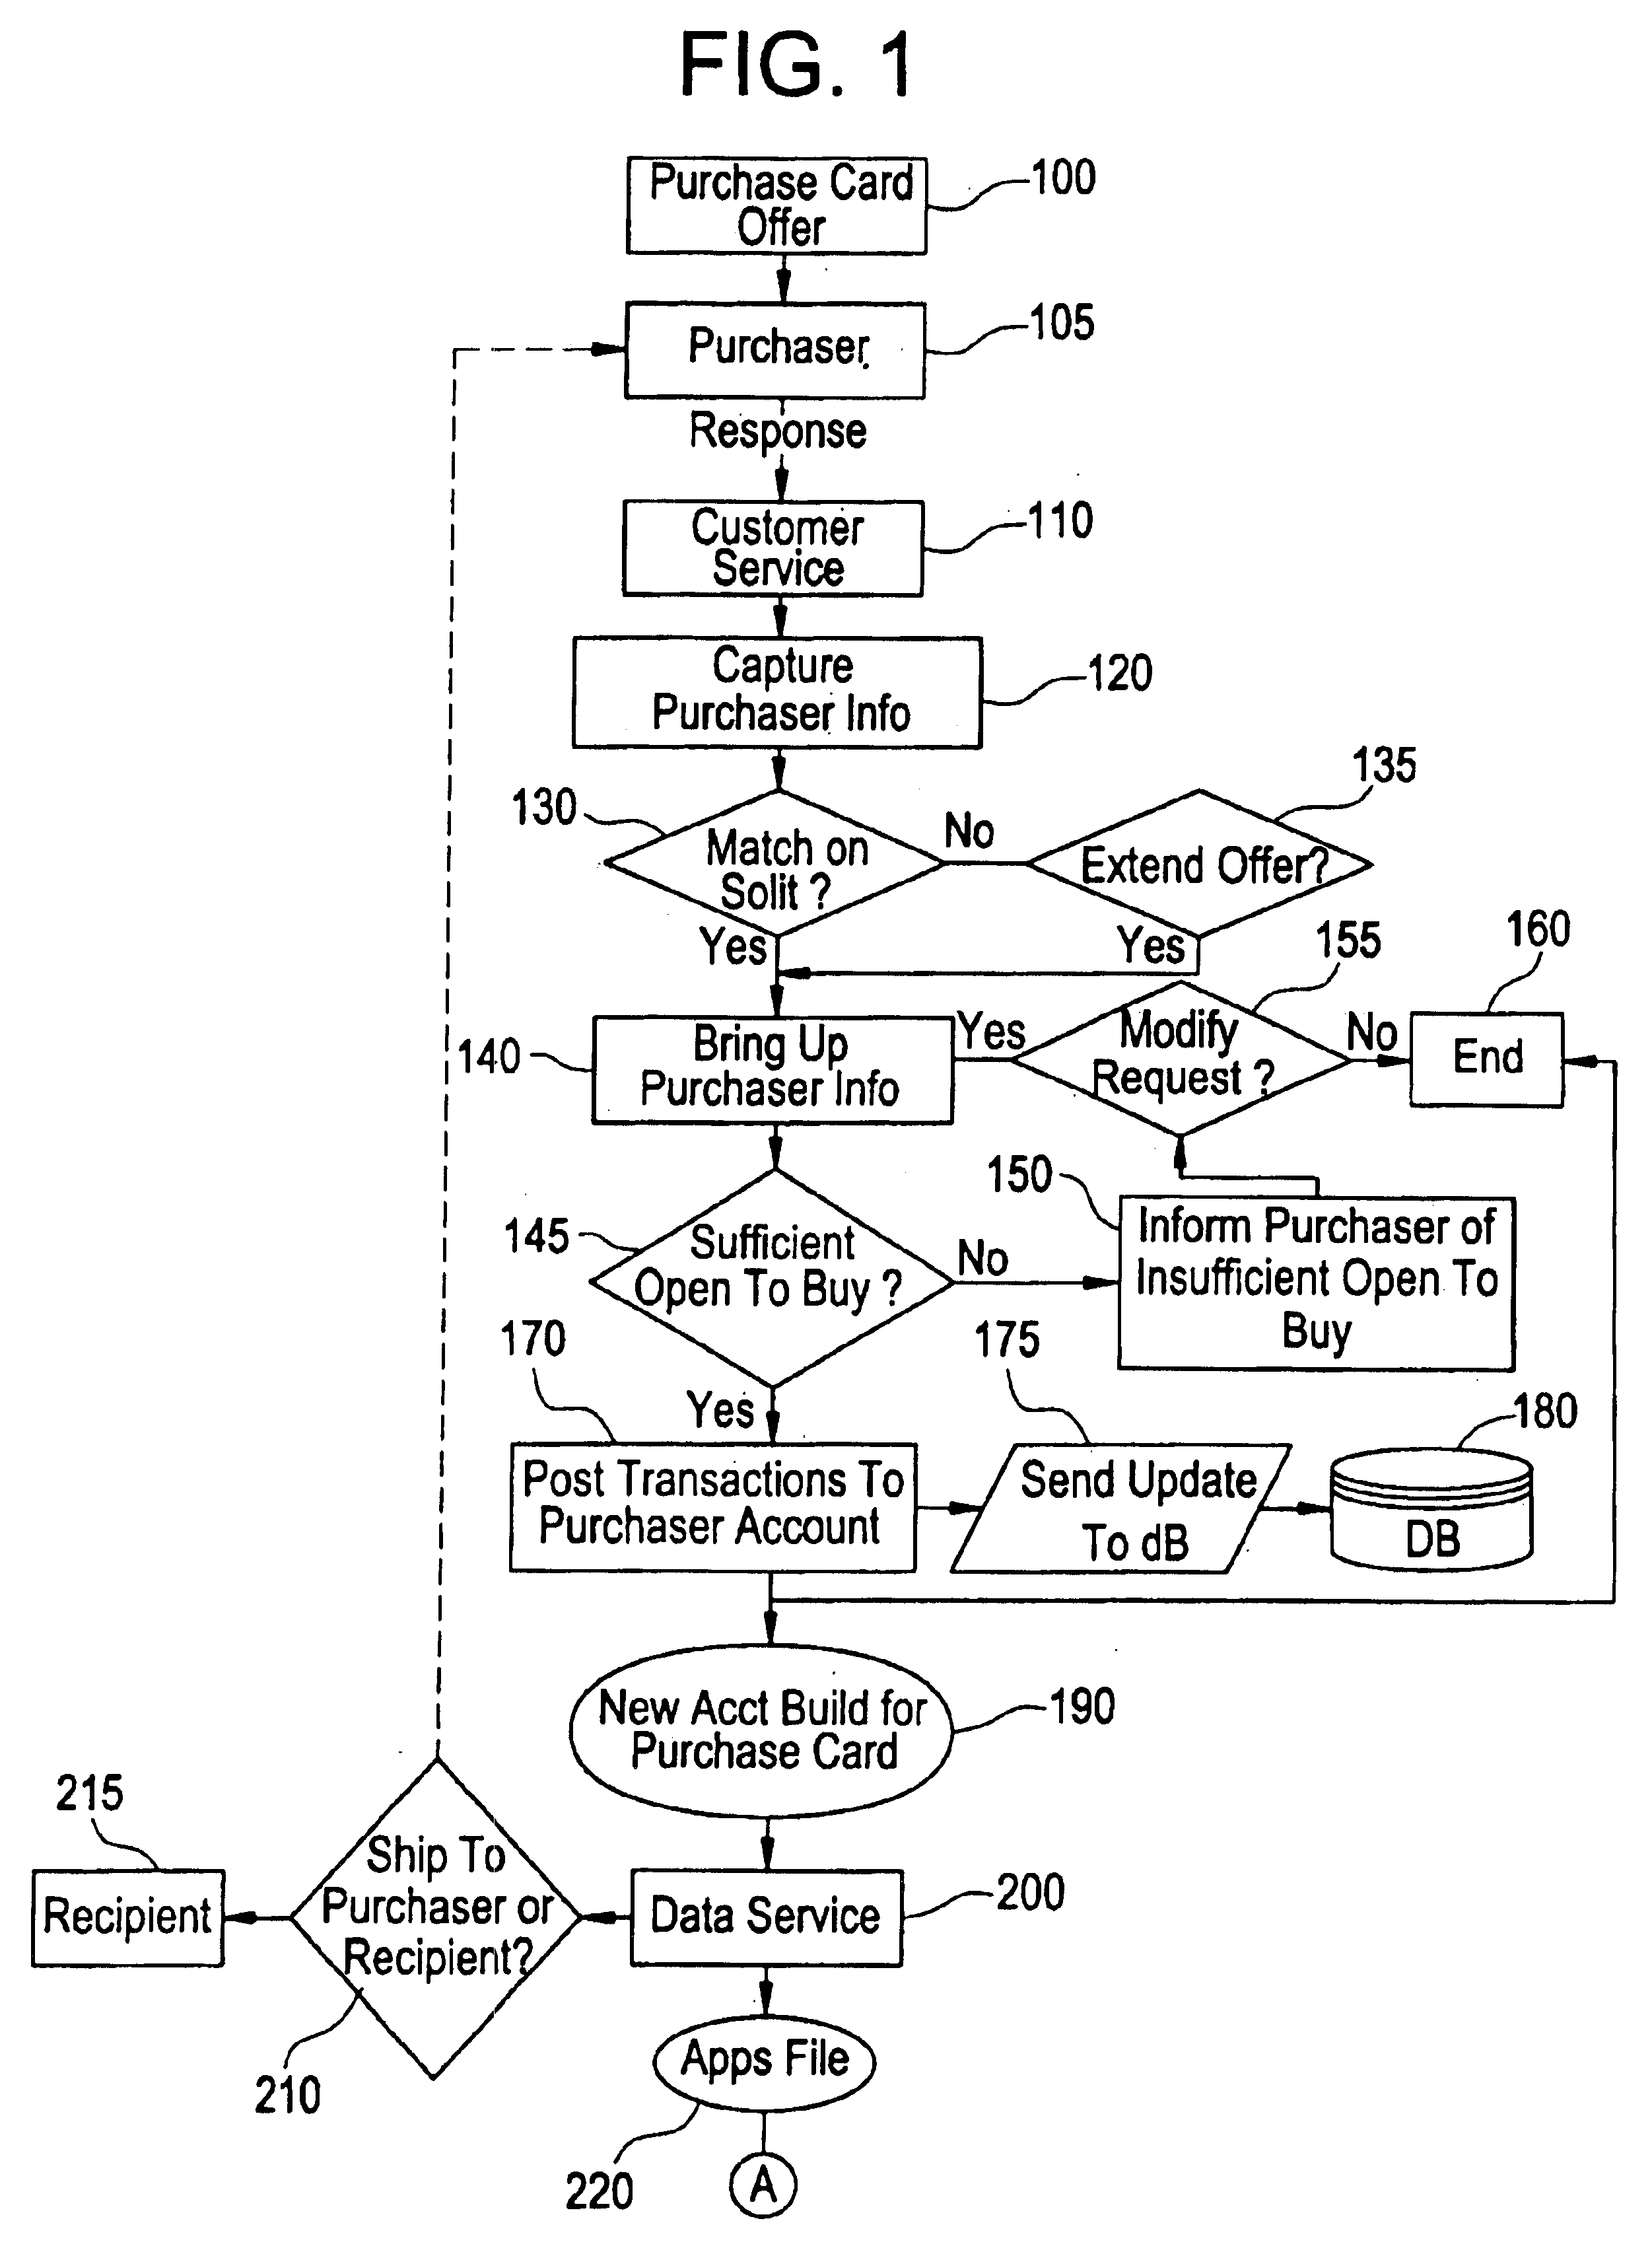 Debit purchasing of stored value card for use by and/or delivery to others